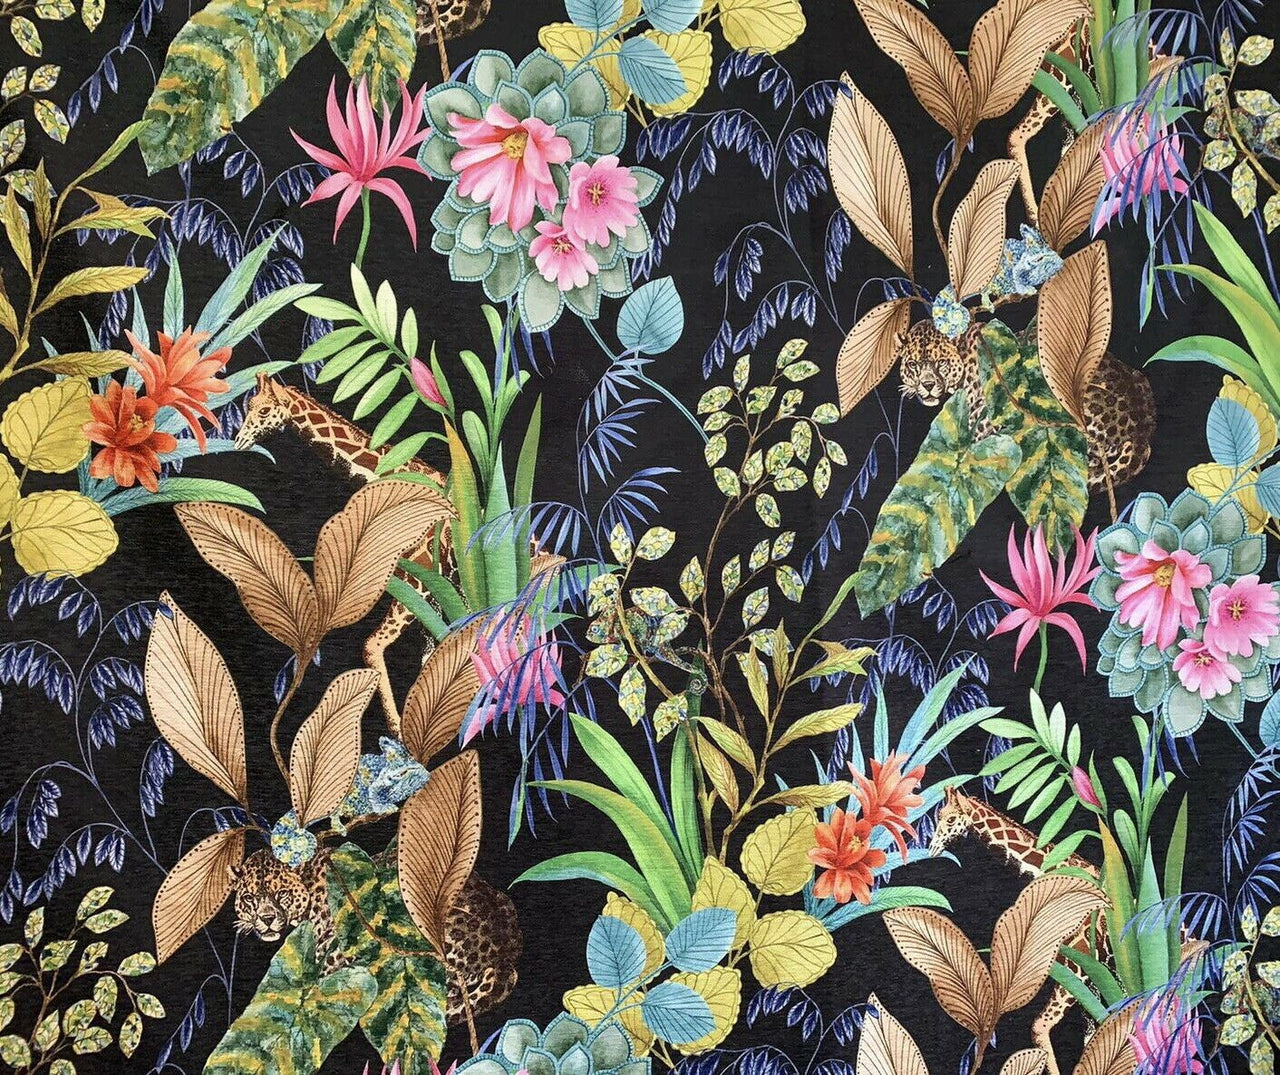 Tonga Jungle Black Fabric By The Meter Leopard Sewing Material Giraffe Botanic Floral Plants Animals pattern Textile